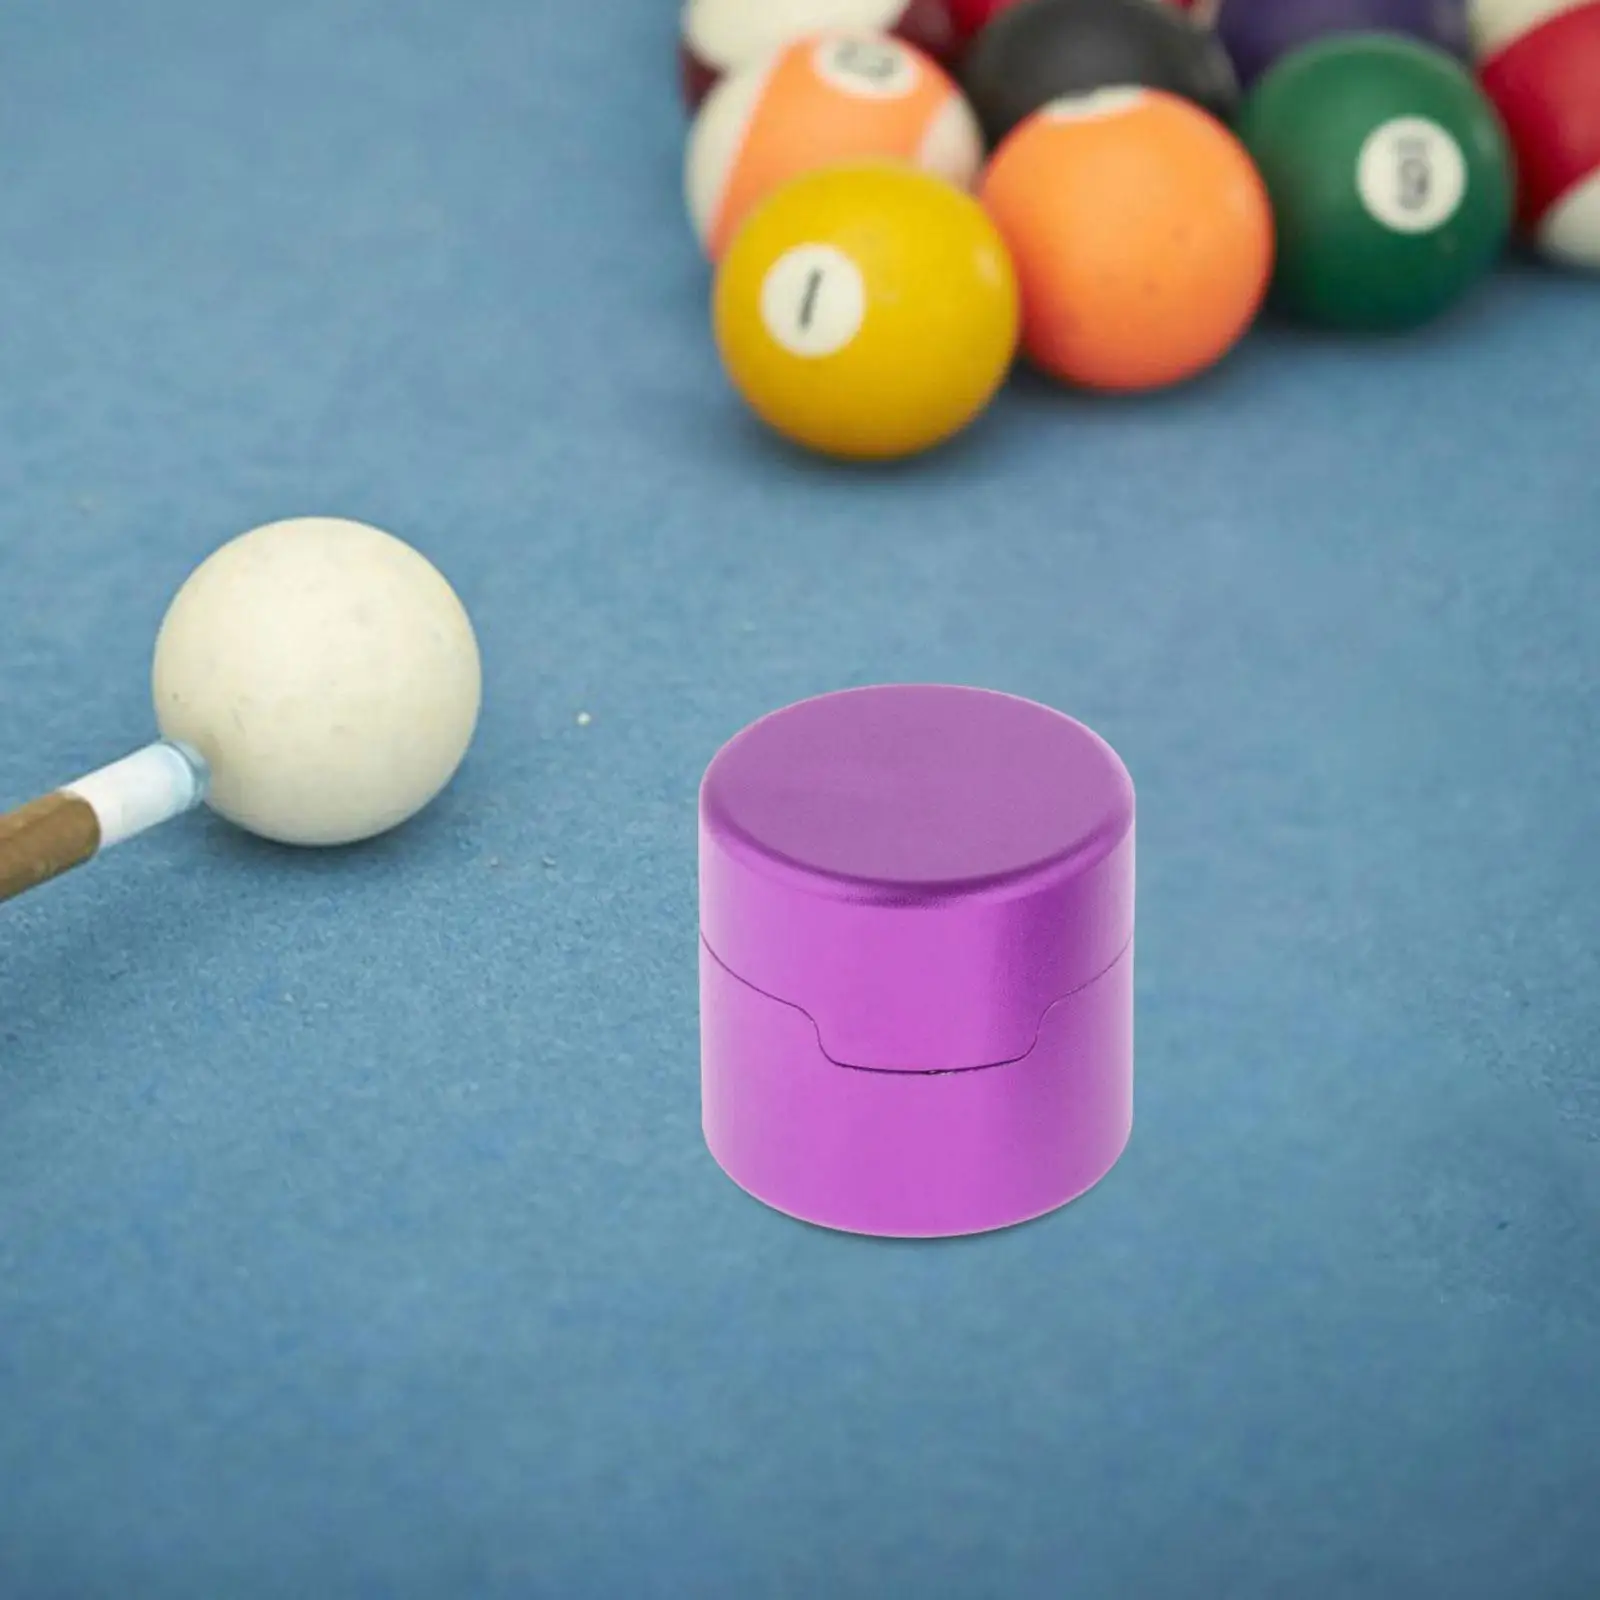 Pool Cue Chalk Holder Round Shaped Aluminum Alloy Portable Easy to Carry Carrier Case Box Chalk Holder Billiards Accessories